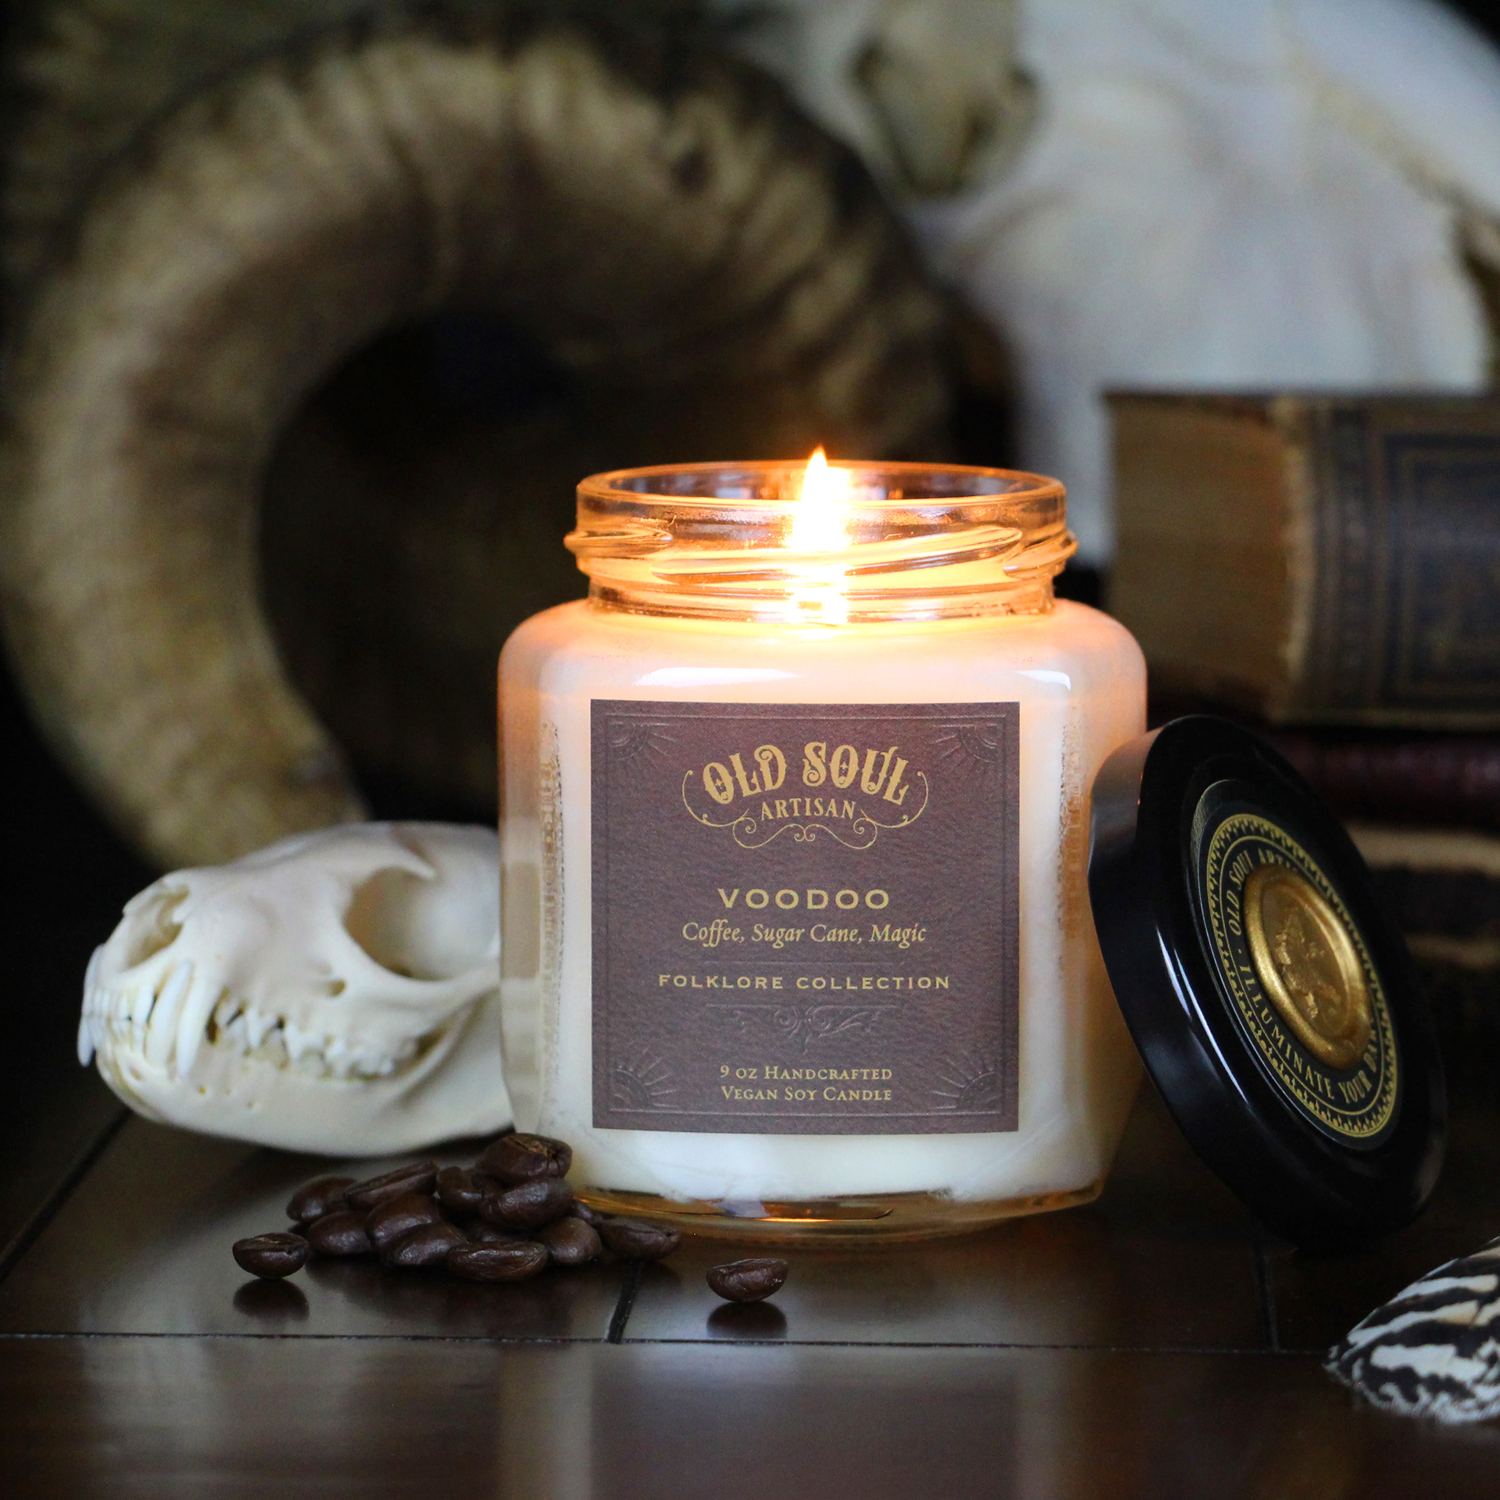 Ritual Soy Candle (frankincense and myrrh) - Old Soul Artisan